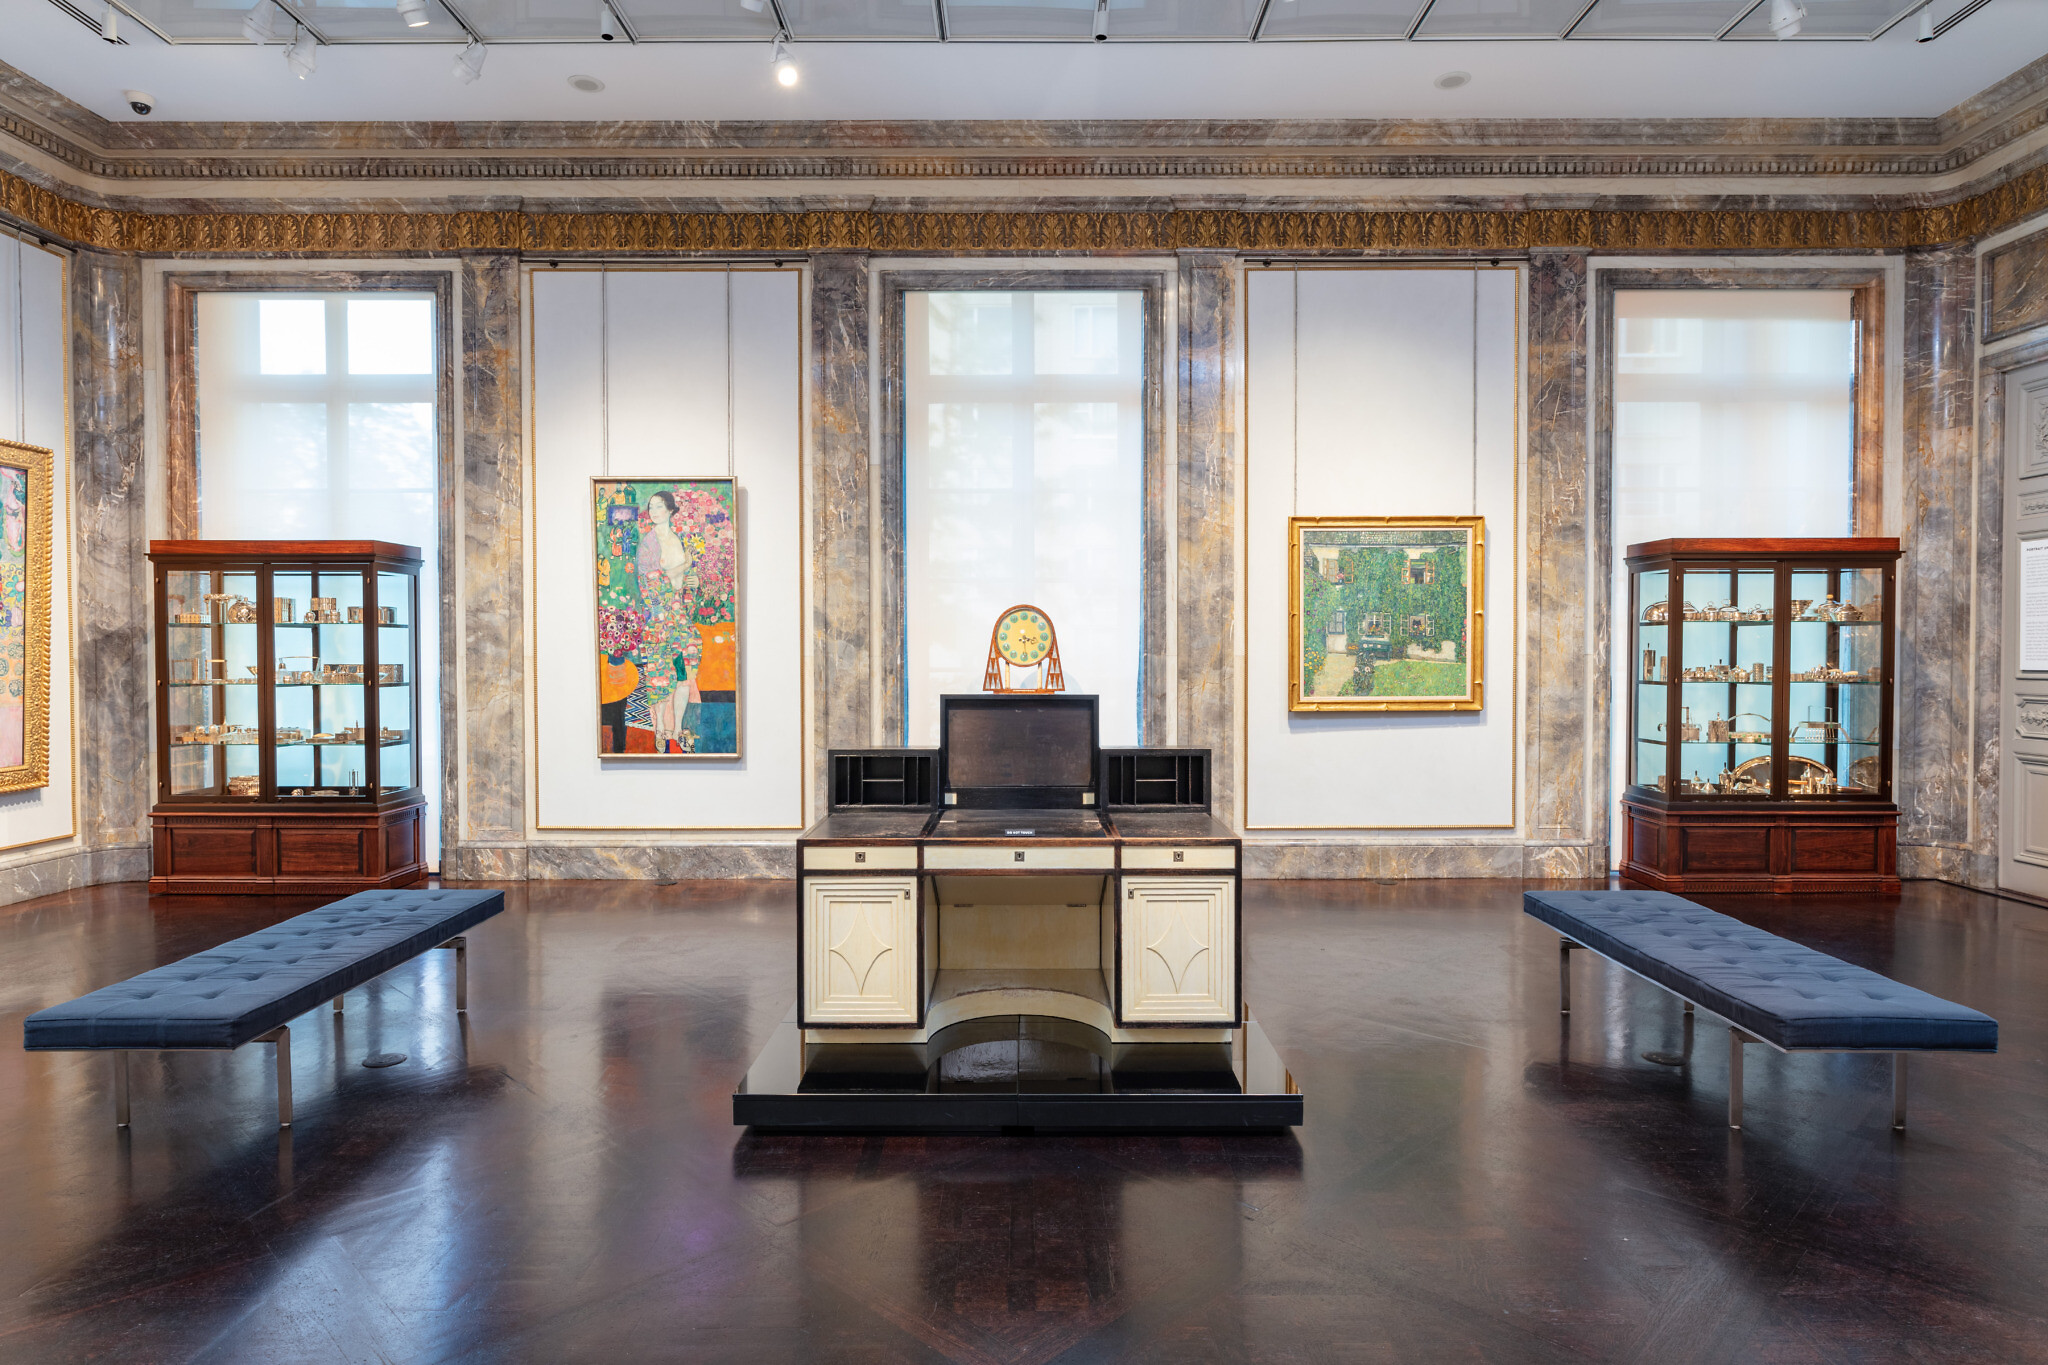 Installation view of 'The Ronald S. Lauder Collection' on view at Neue Galerie New York. (Hulya Kolabas/ Courtesy of Neue Galerie New York)